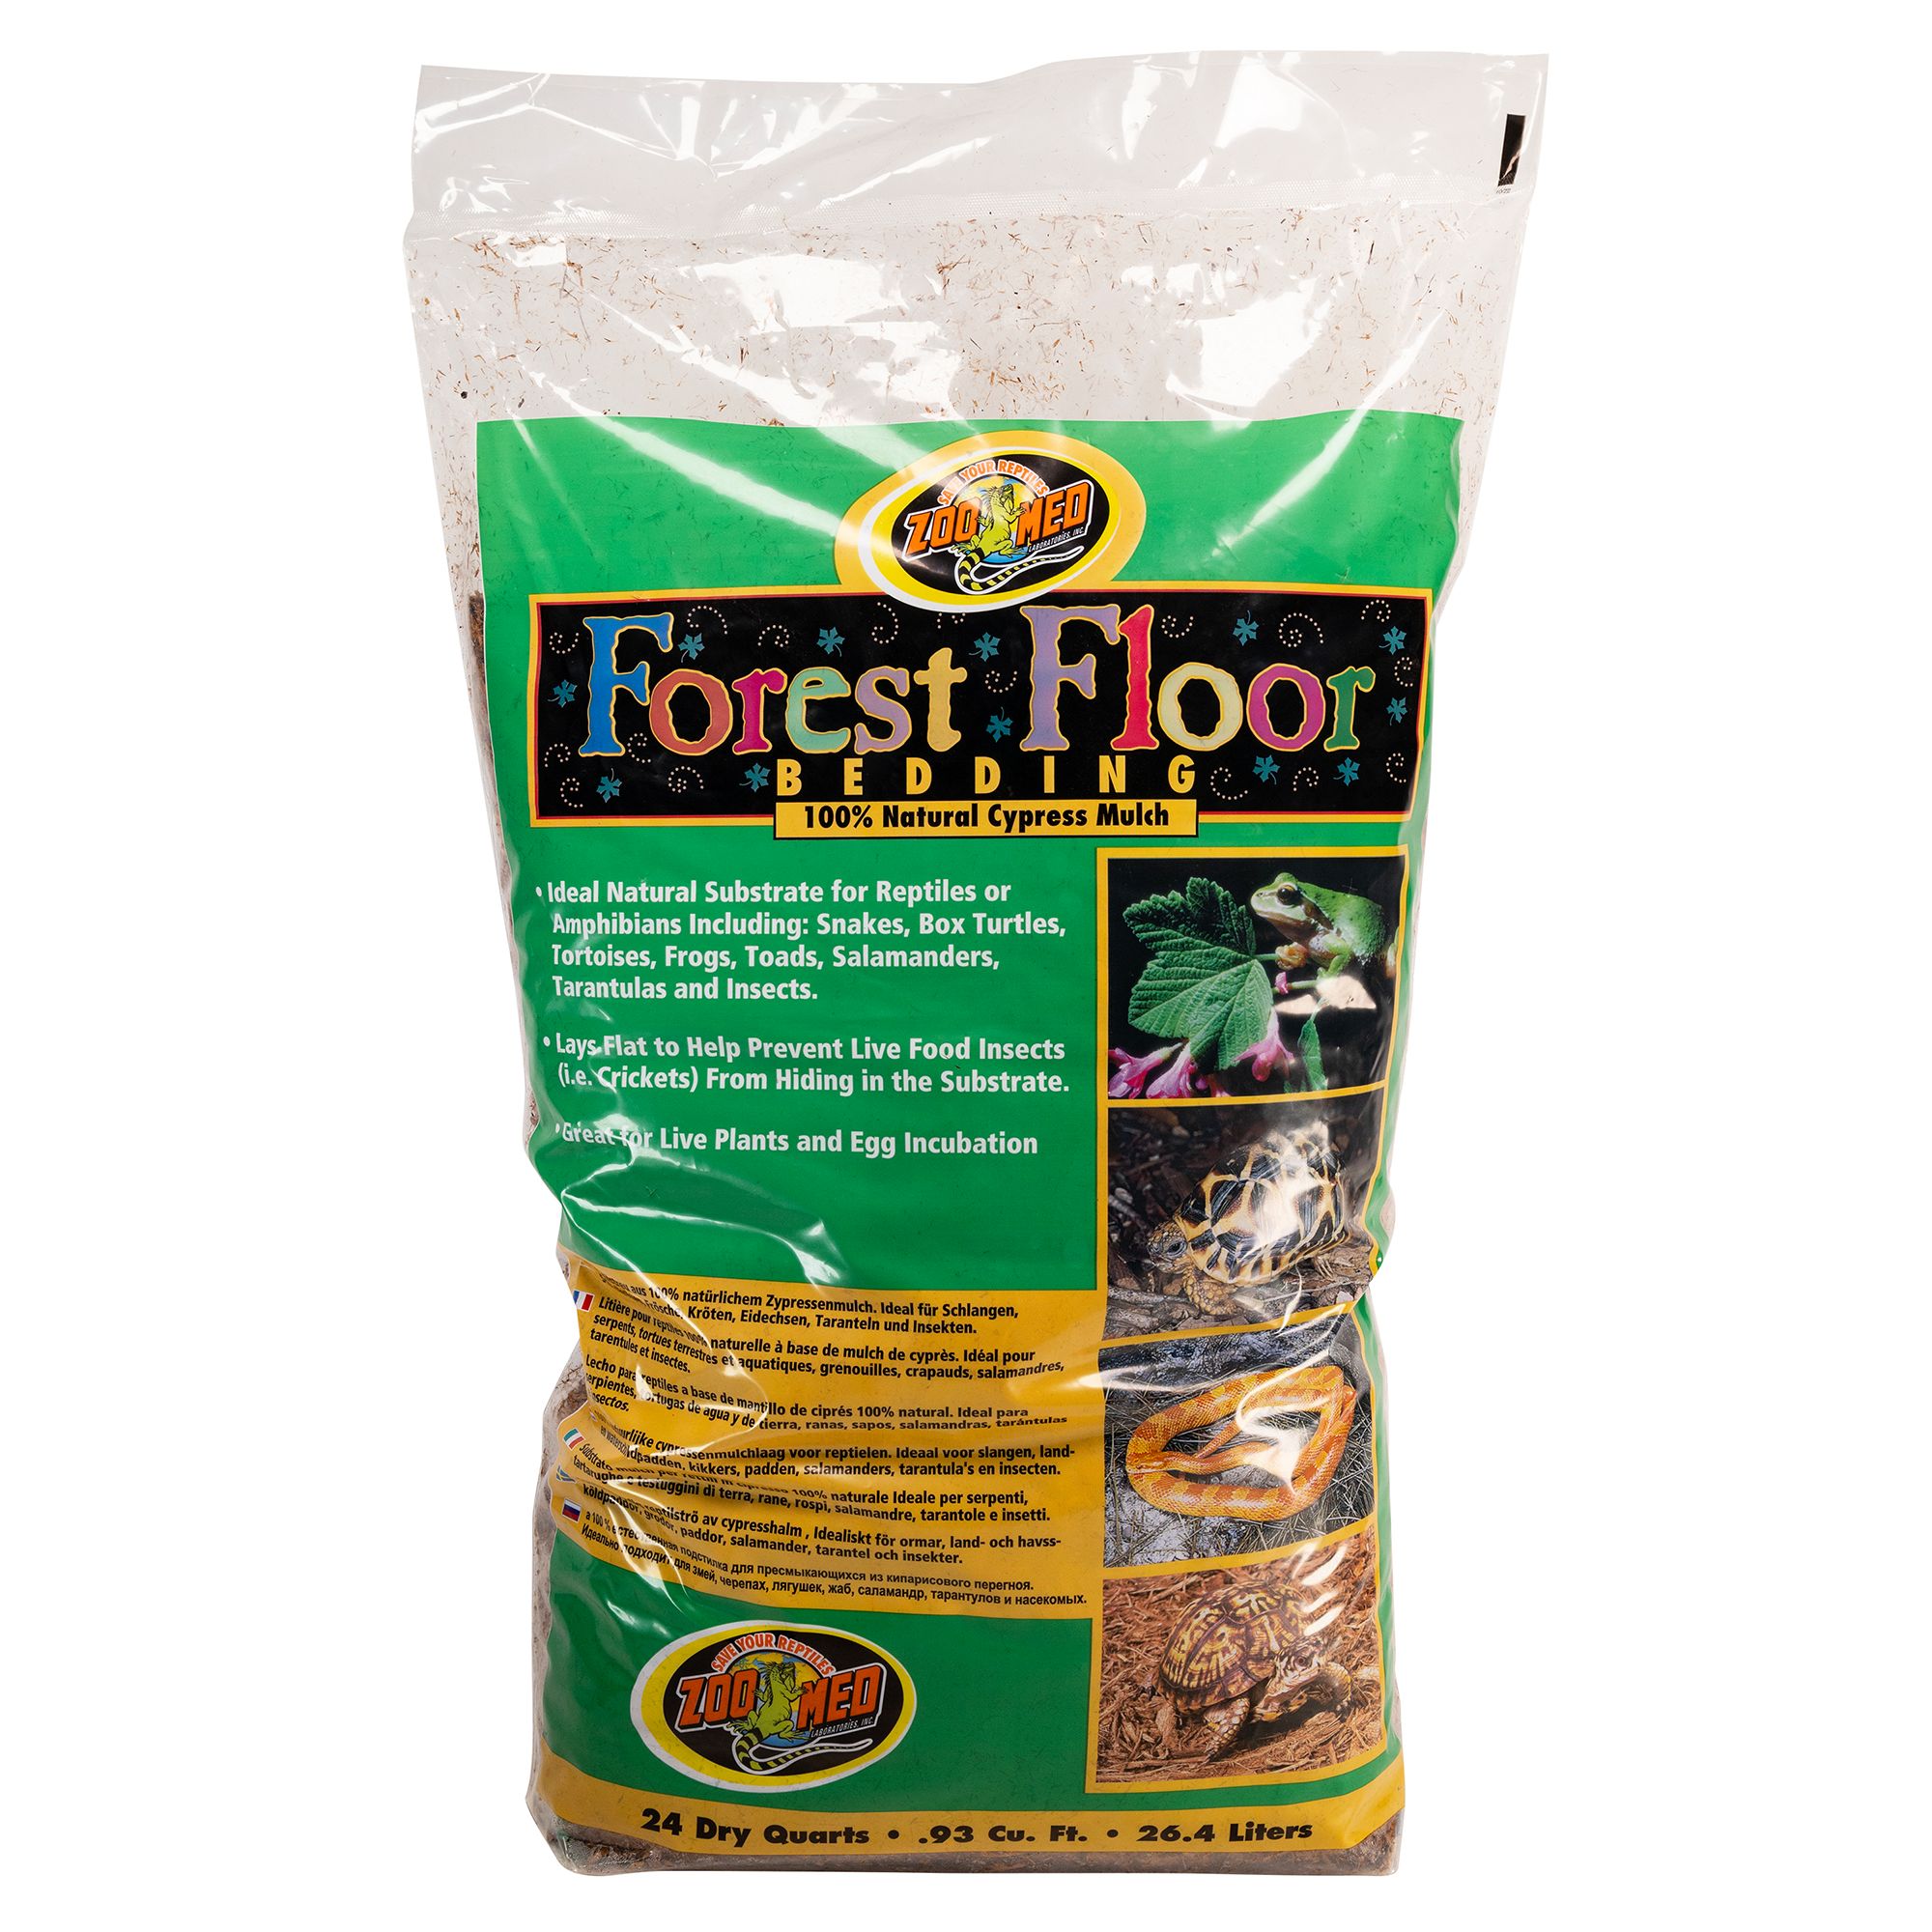 Zoo Med Forest Floor Reptile Bedding Reptile Substrate Bedding